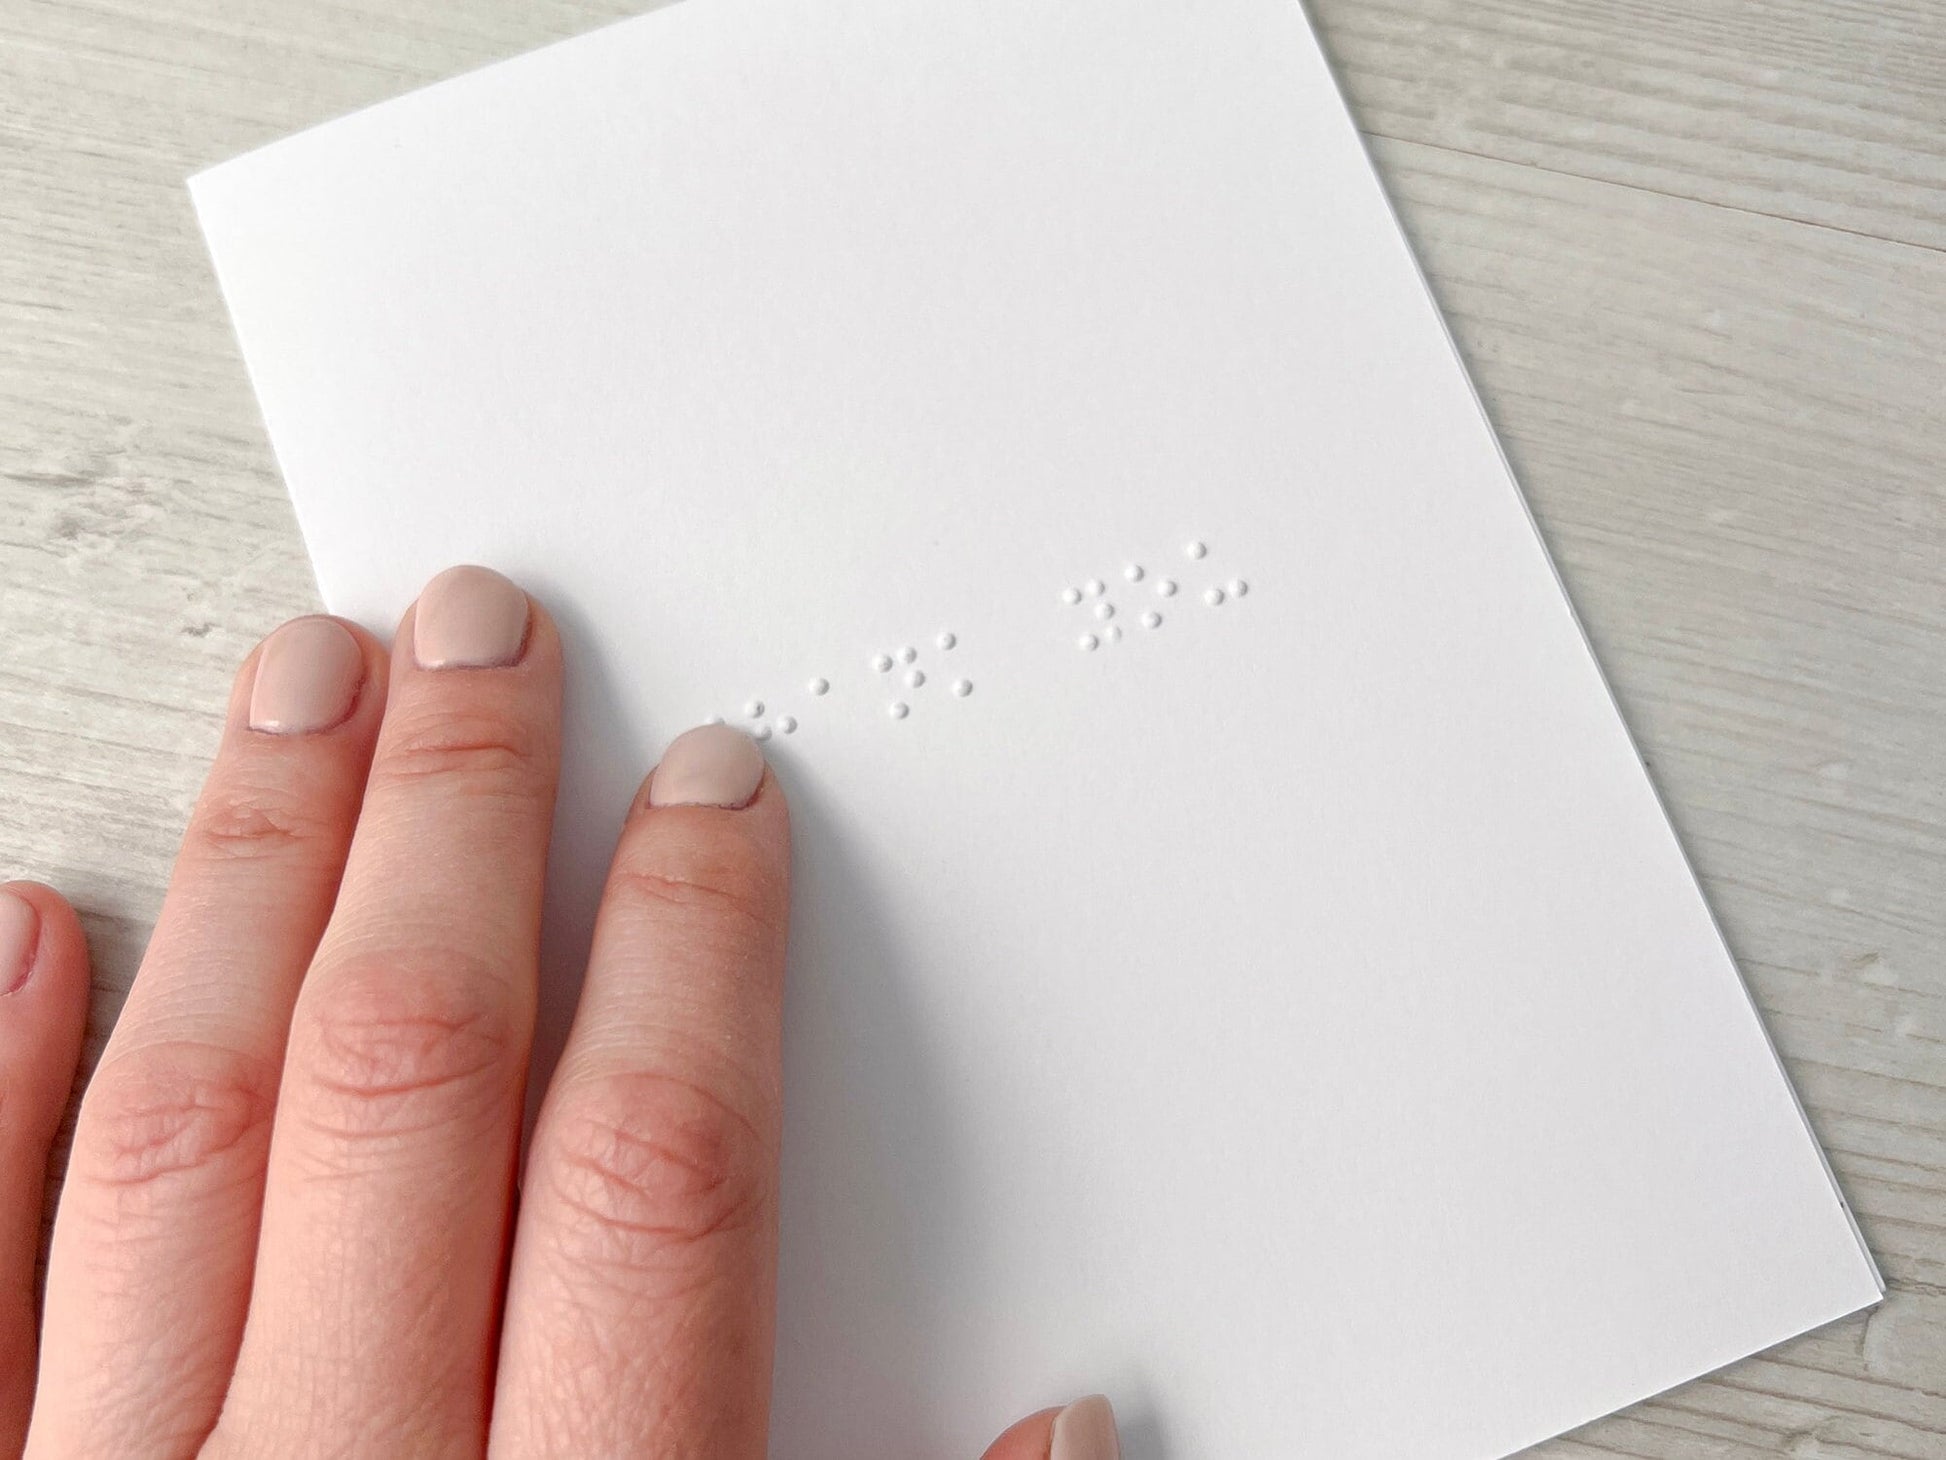 Happy Birthday You Old Fart - Funny Braille Birthday Card for Blind or Visually Impaired People